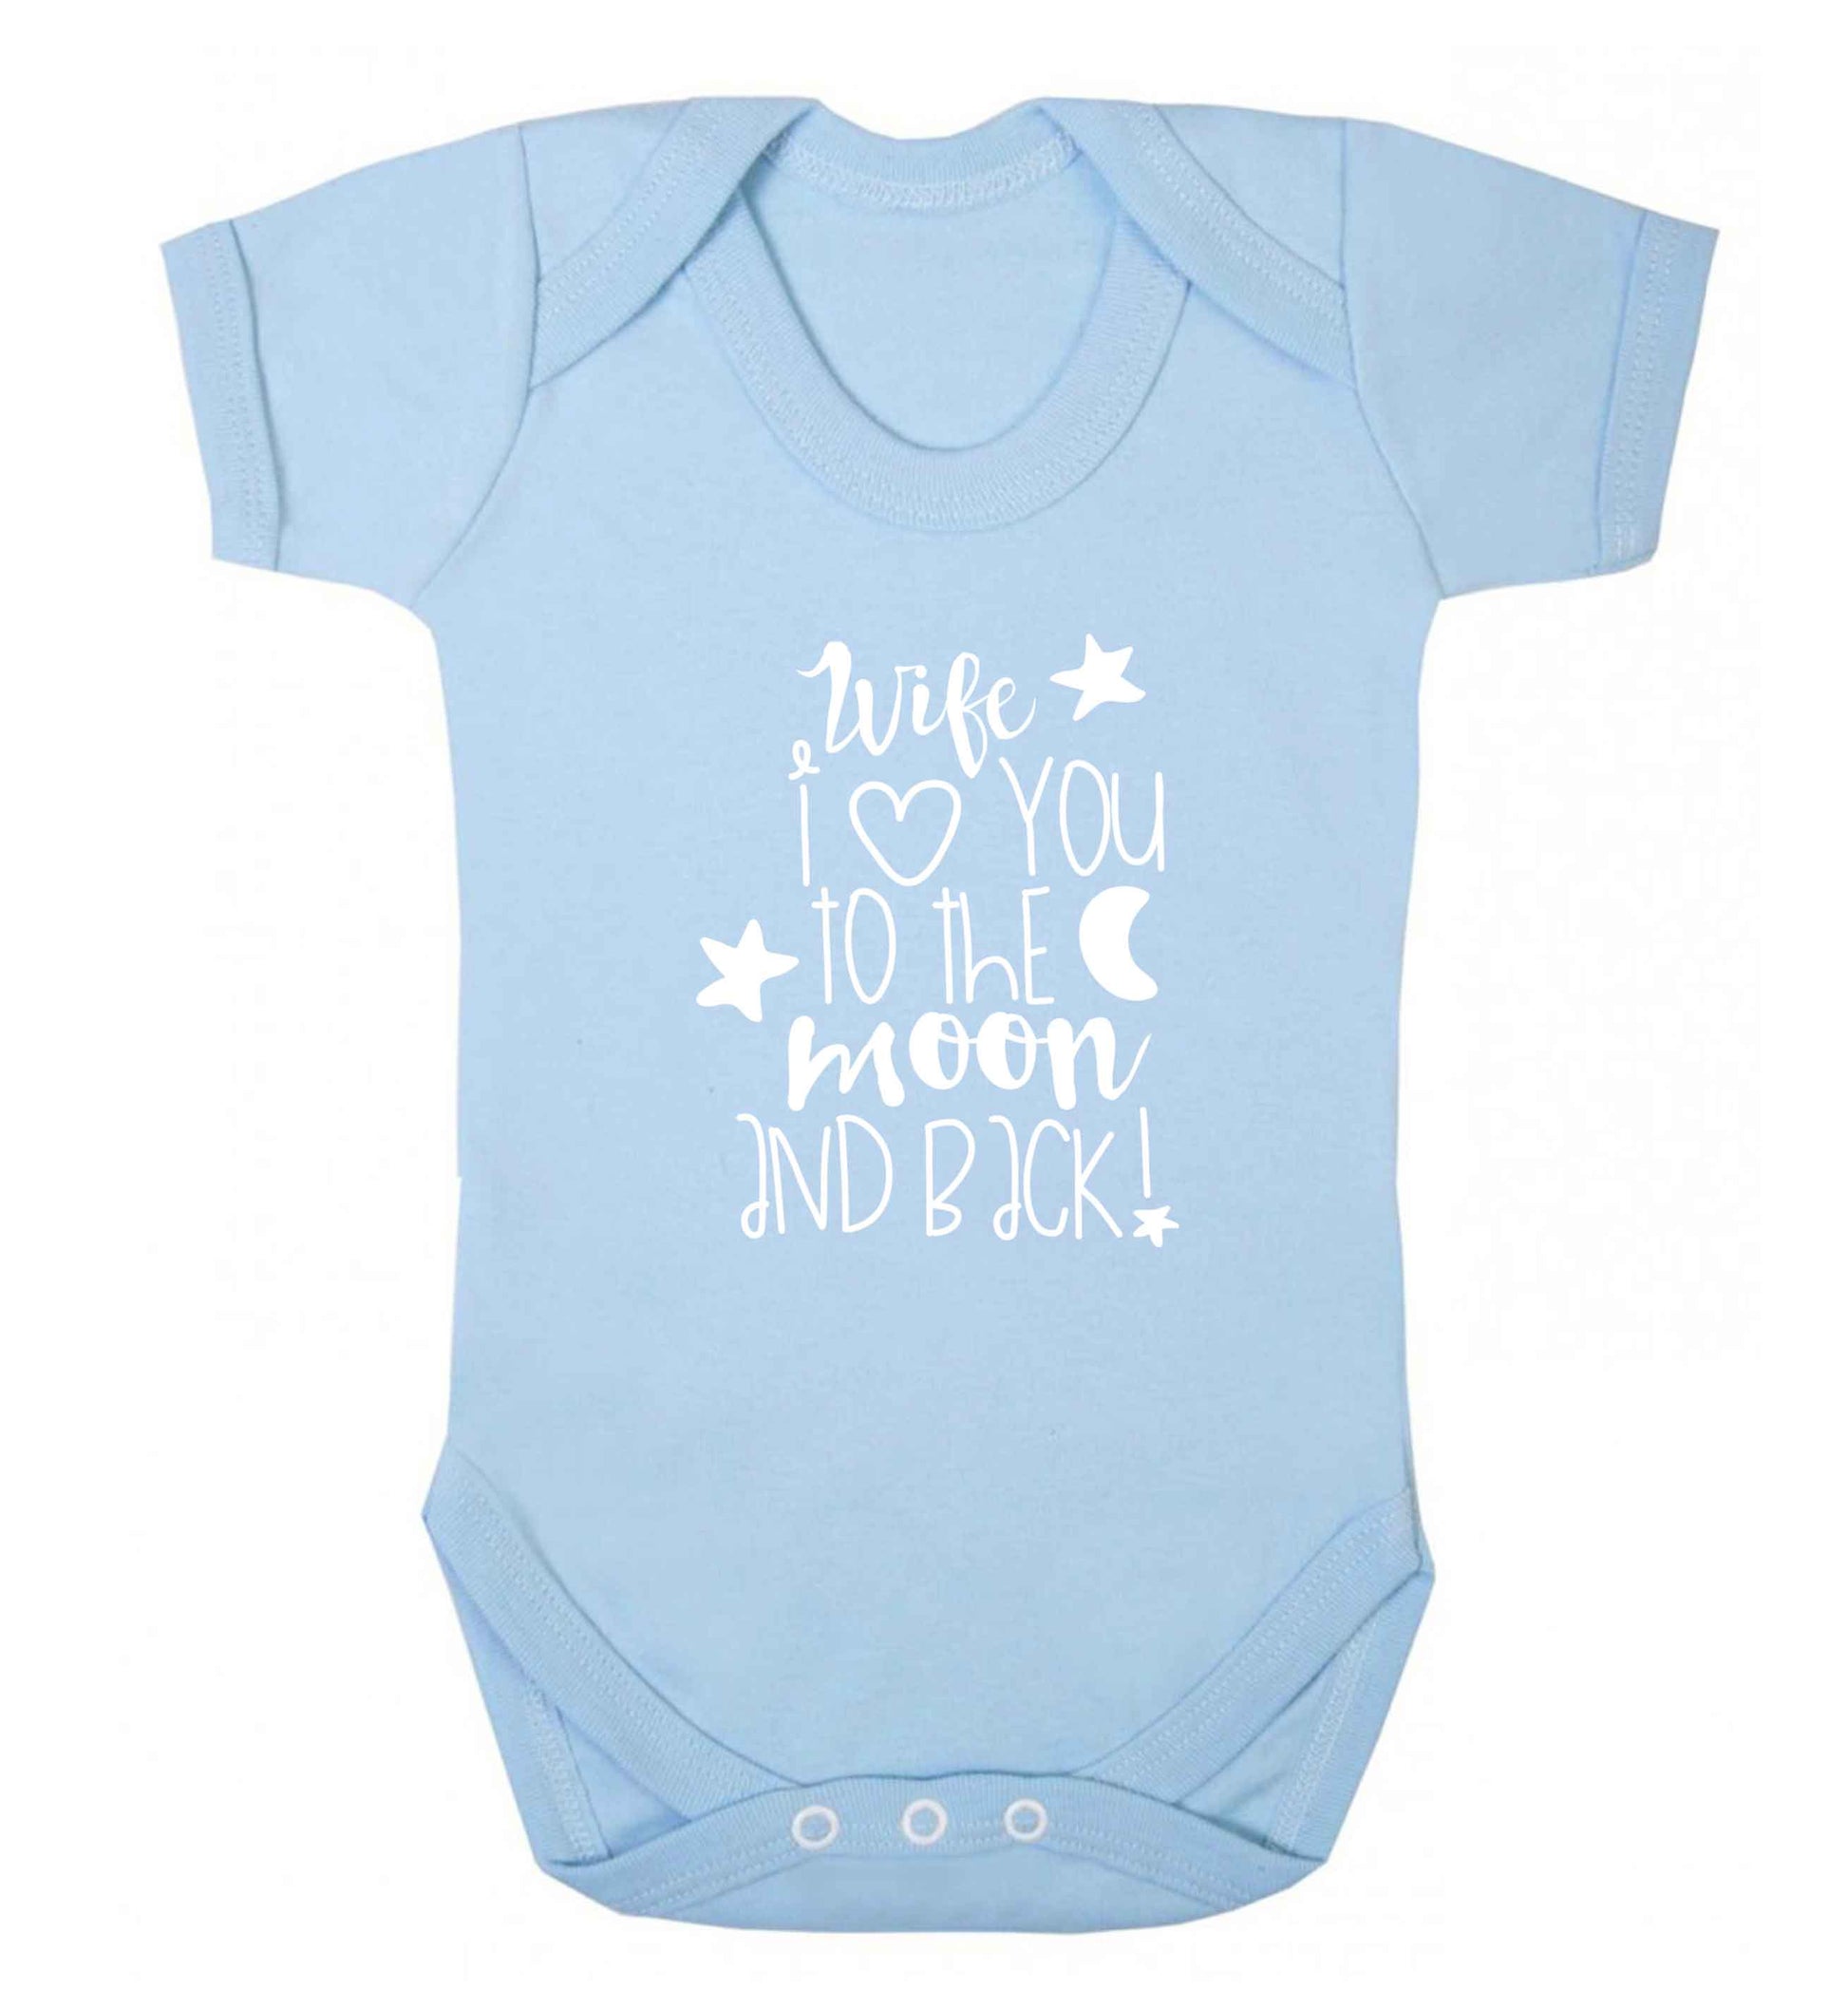 Wife I love you to the moon and back baby vest pale blue 18-24 months